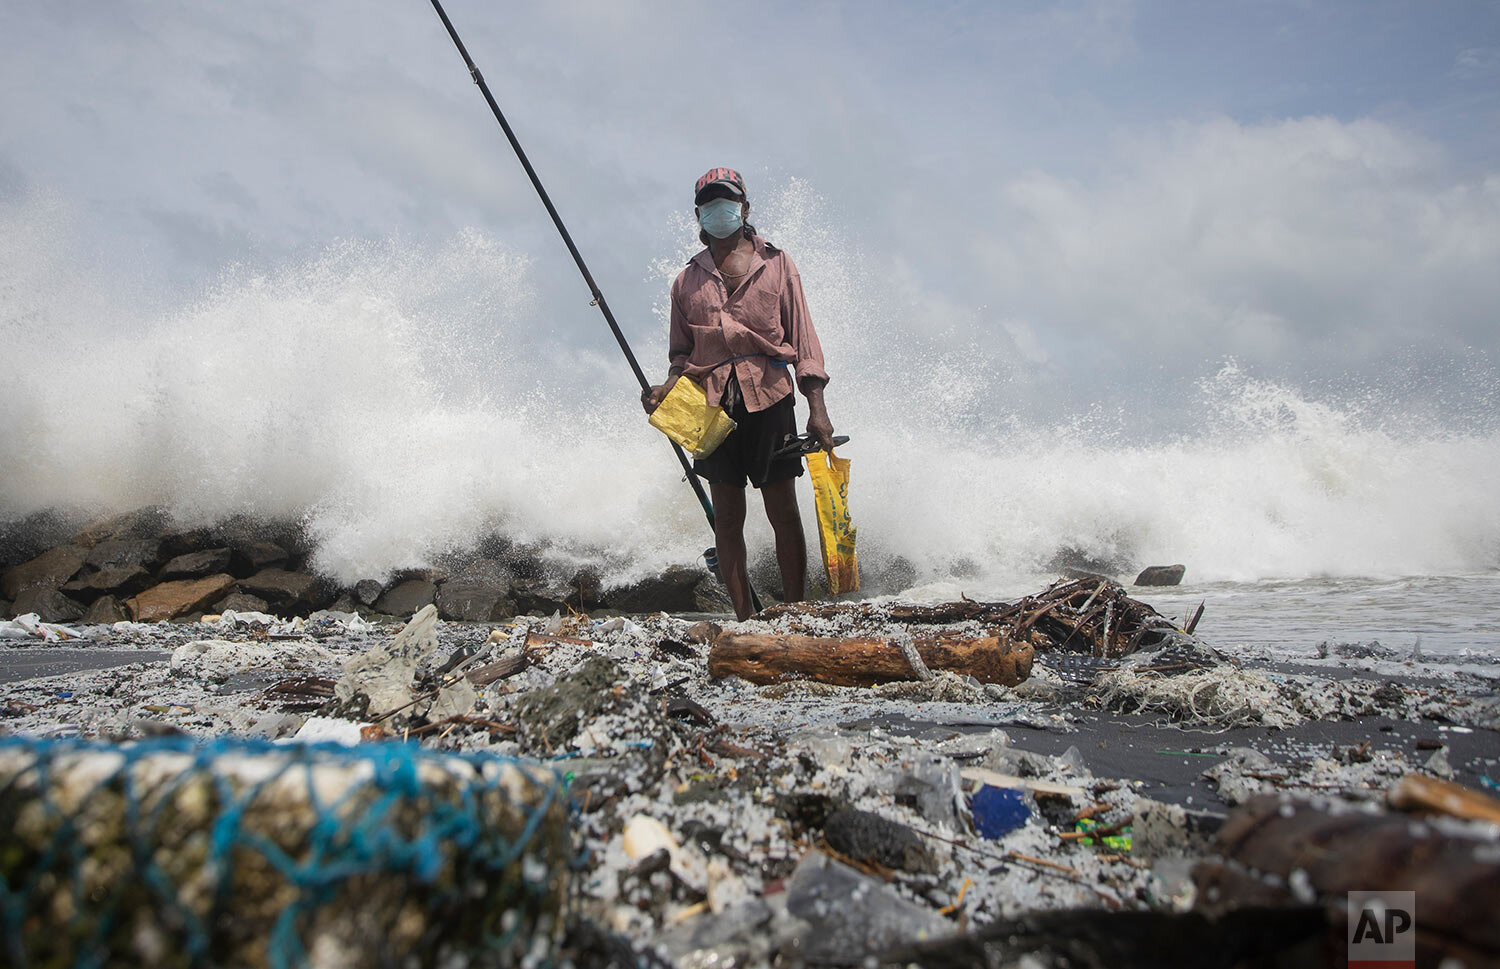   Kindston Jayalath, of Sri Lanka, fishes on a polluted beach filled with plastic pellets washed ashore from the fire-damaged container ship MV X-Press Pearl in Kapungoda, on the out skirts of Colombo, Sri Lanka, Friday, June 4, 2021.  (AP Photo/Eran